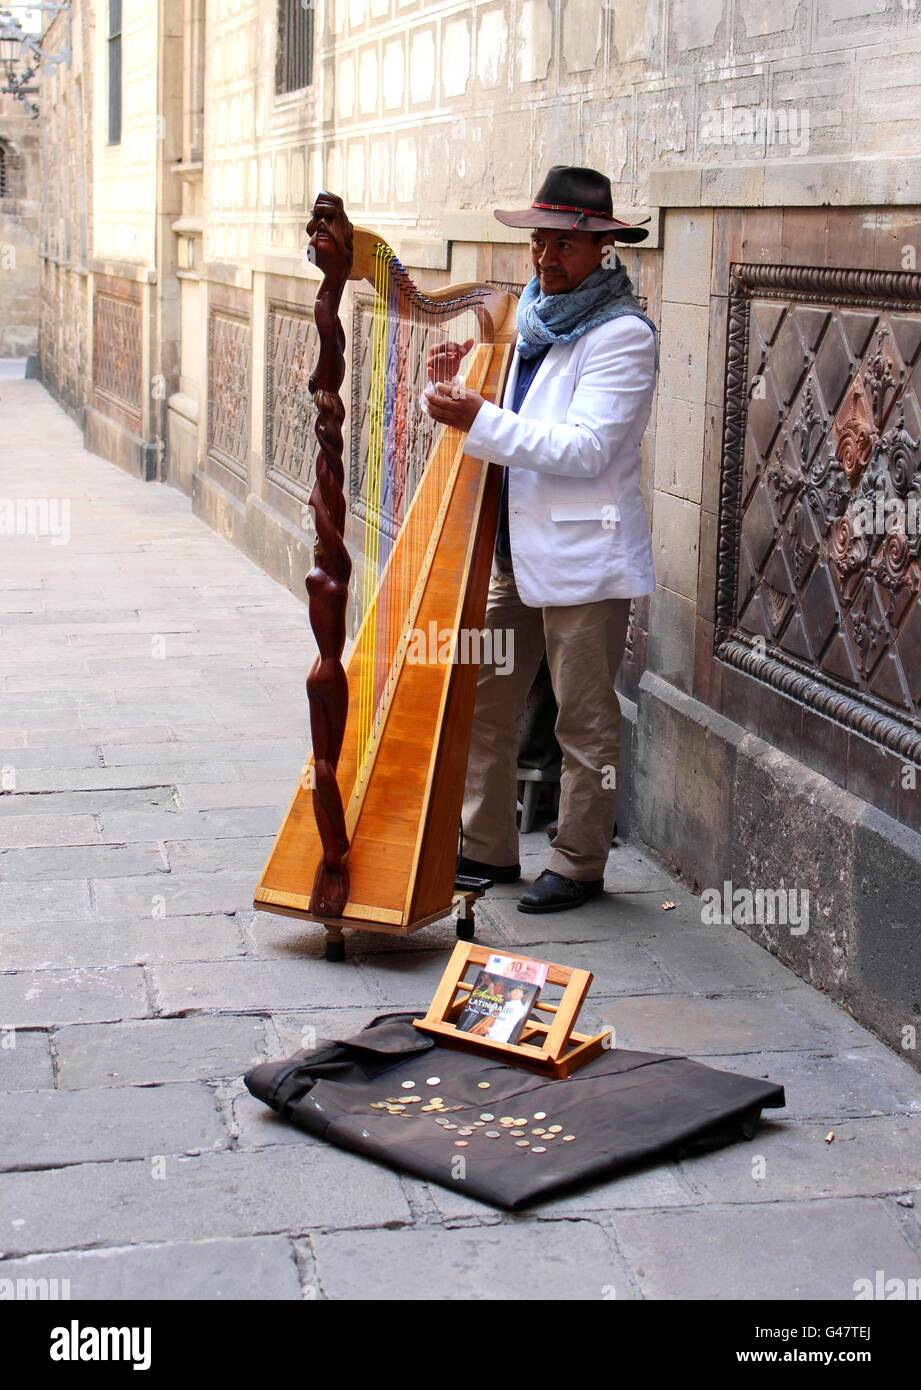 In Barcelona troubadours play classical instruments. Stock Photo